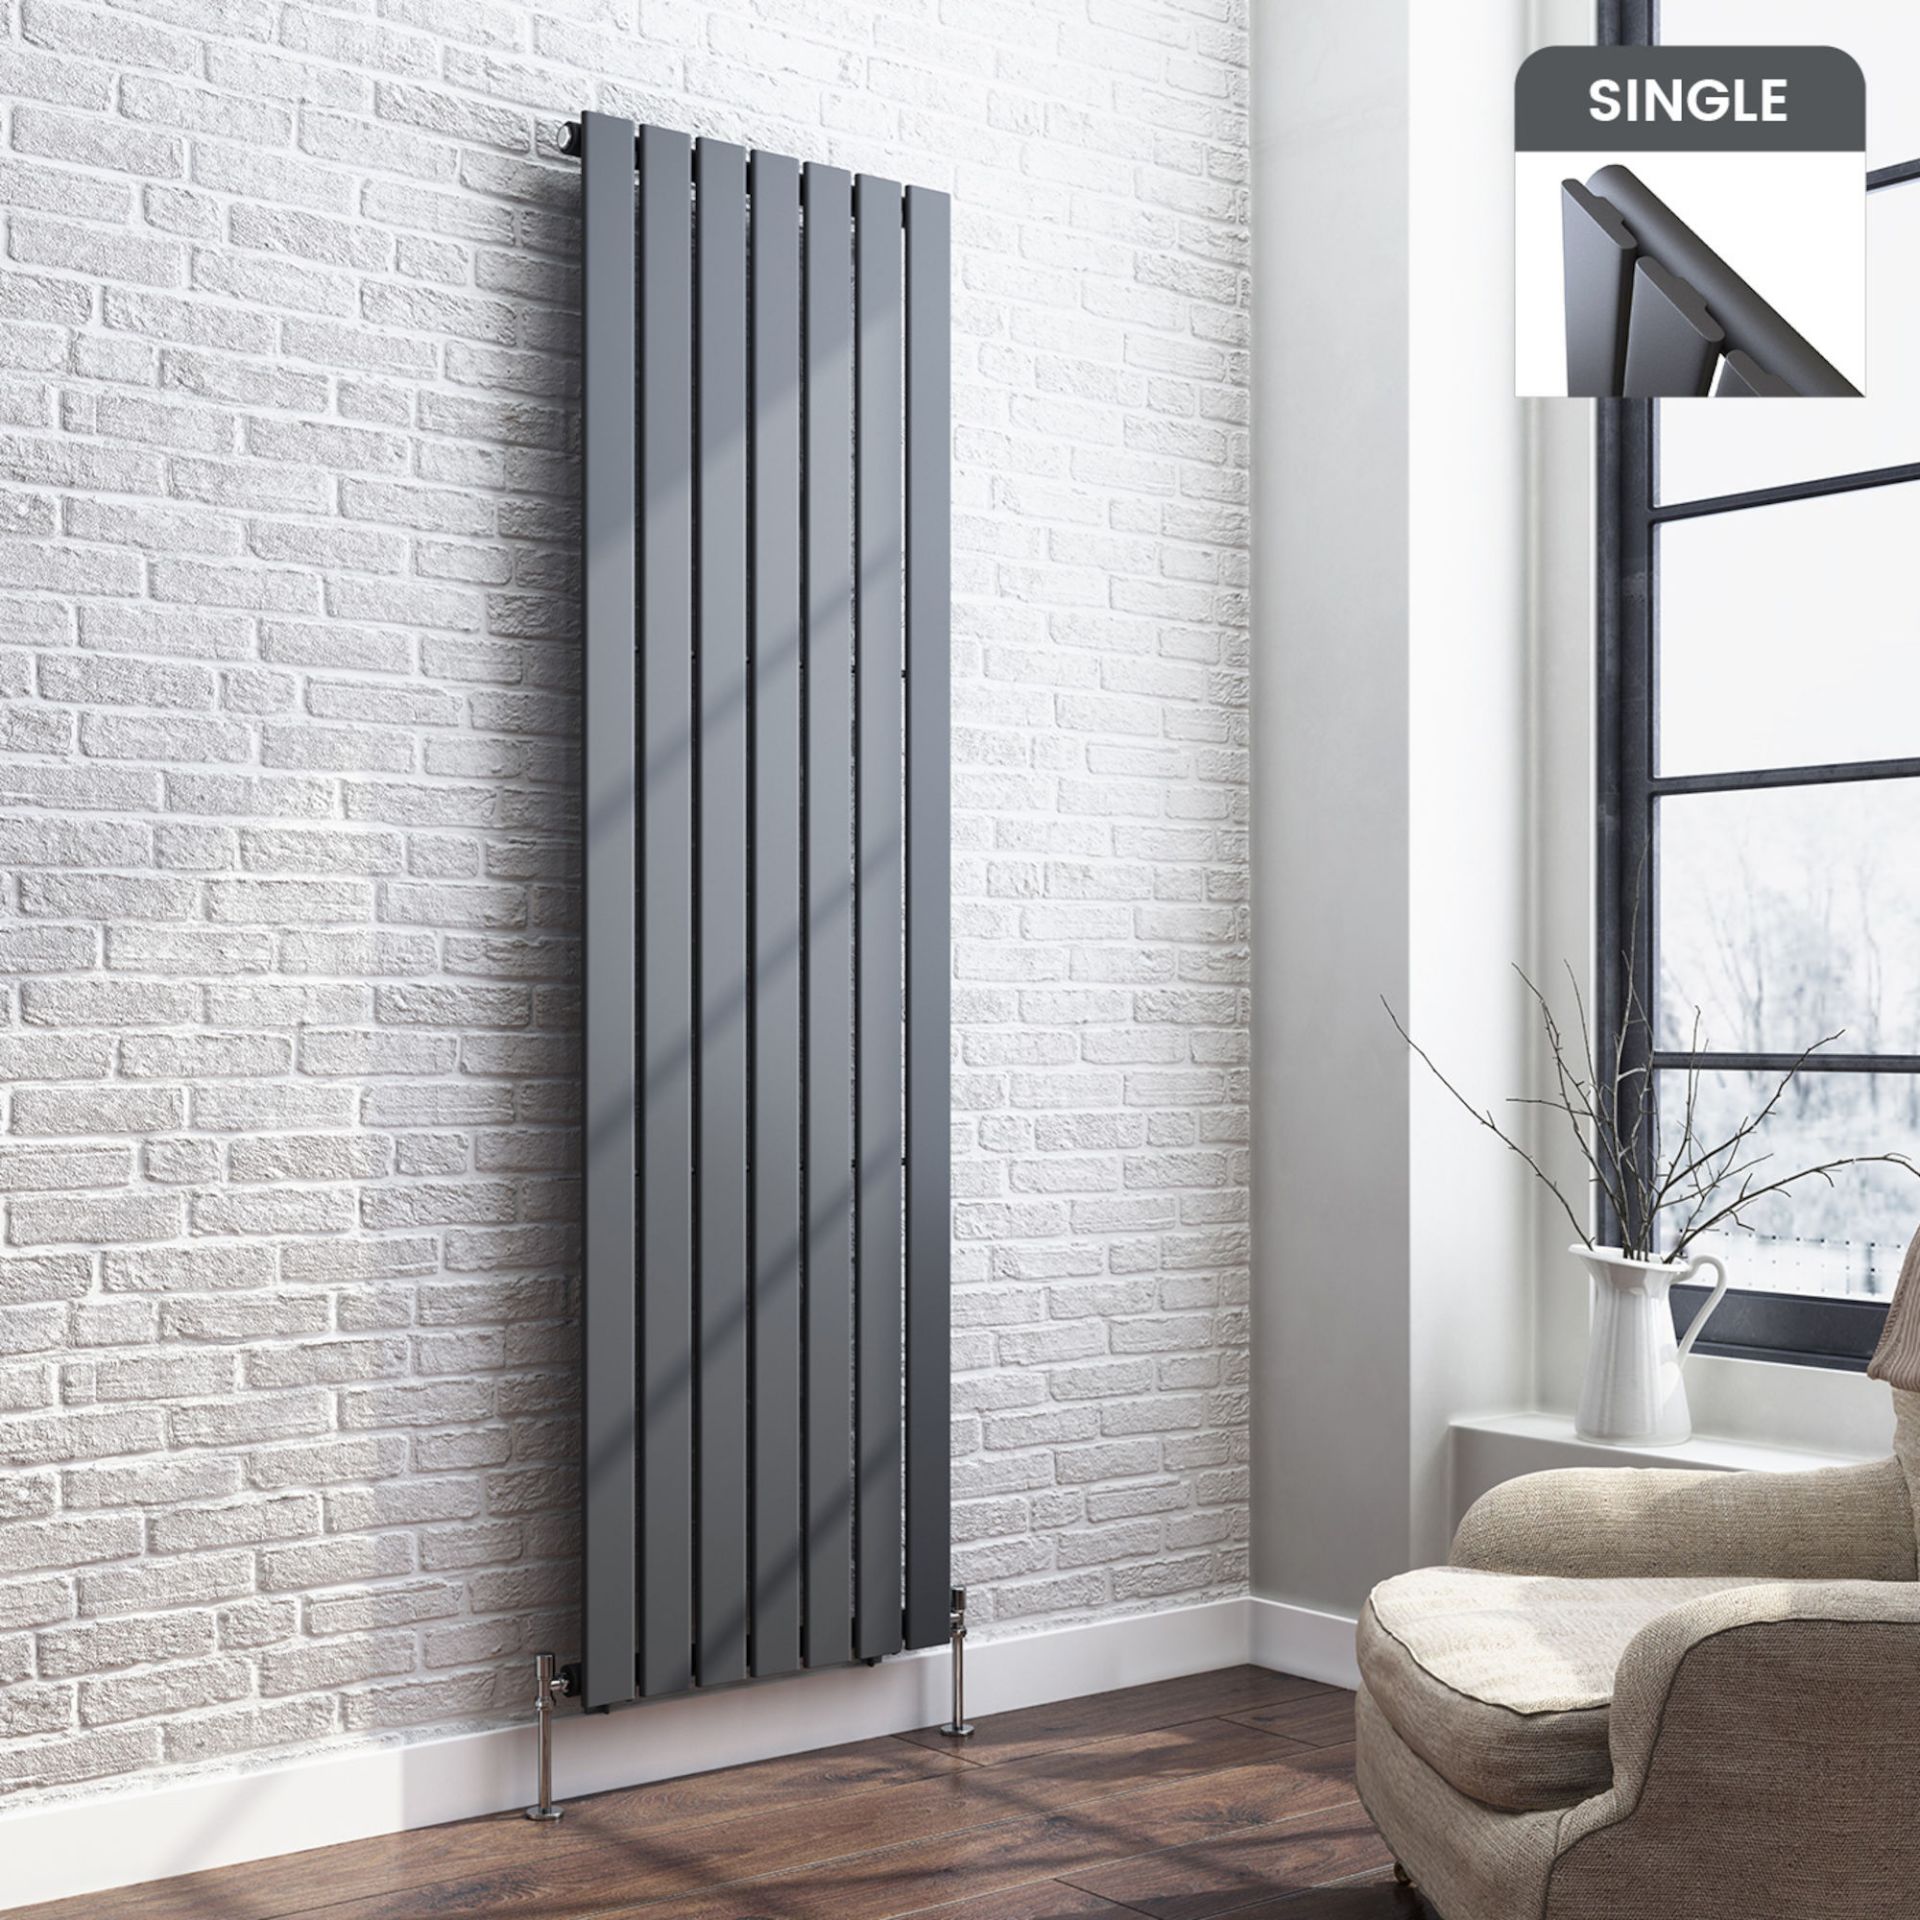 (PT100) 1800x532mm Anthracite Single Flat Panel Vertical Radiator. RRP £329.99. Made from high